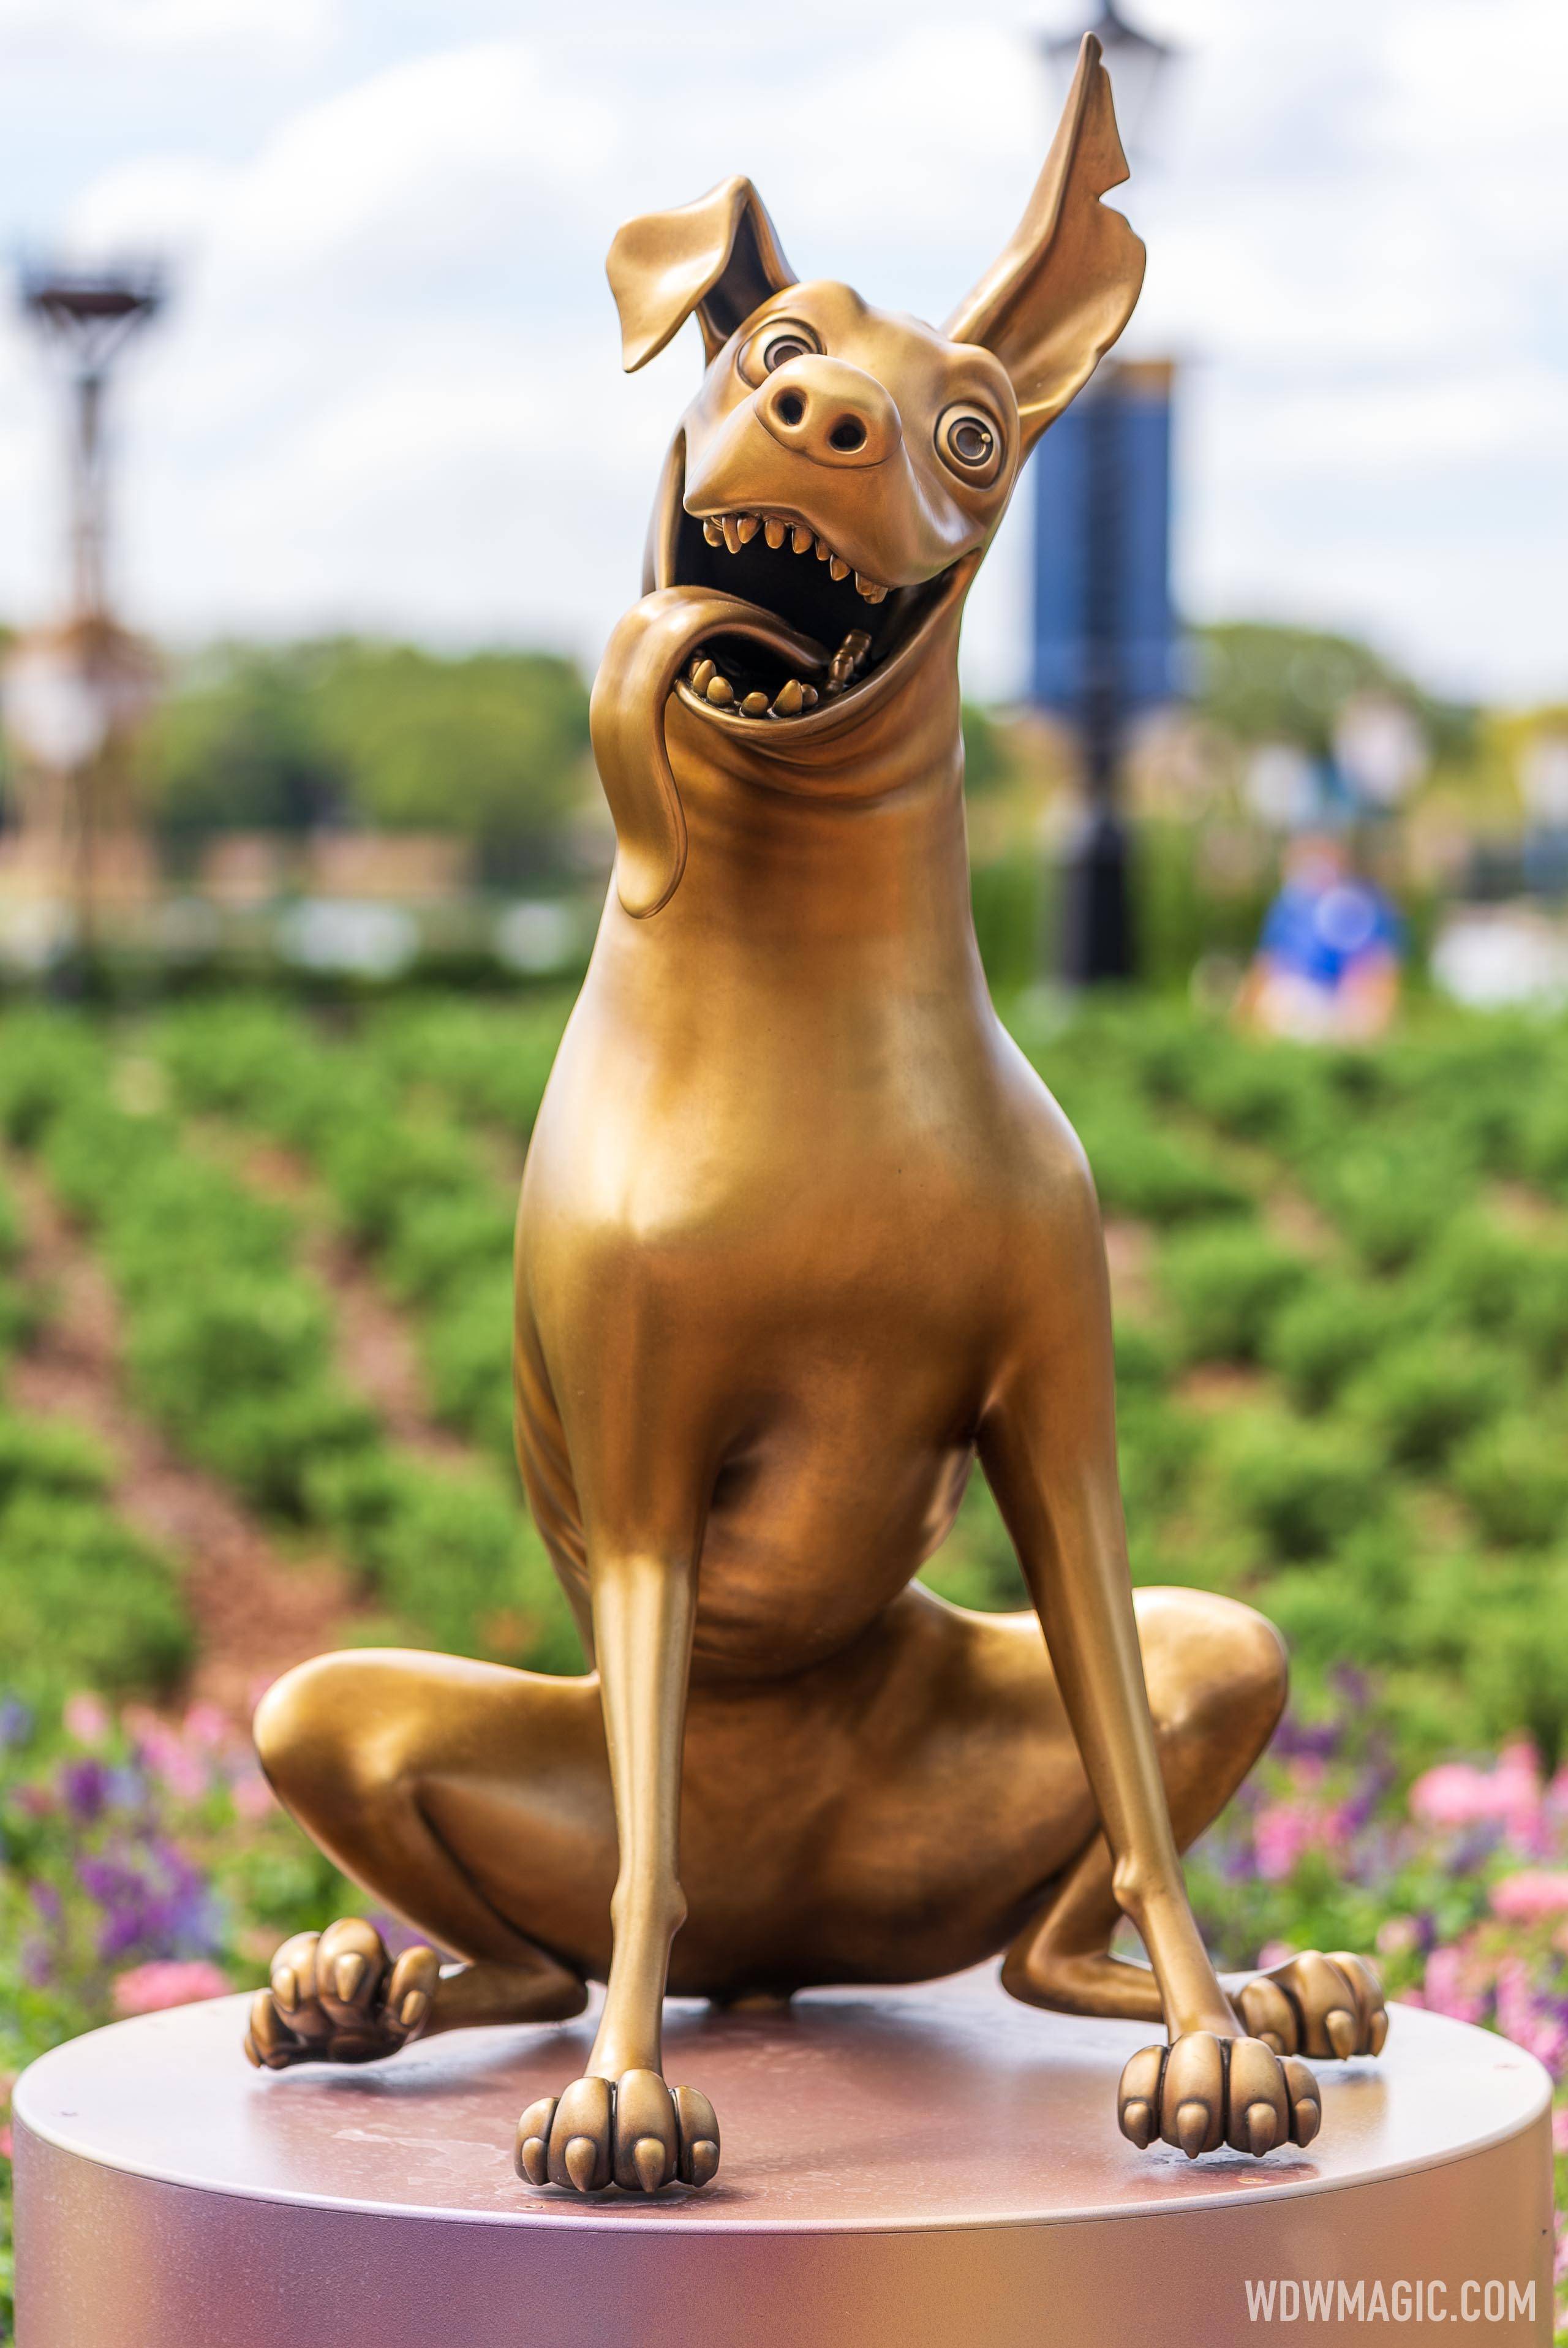 Disney Fab 50 golden character statues at EPCOT